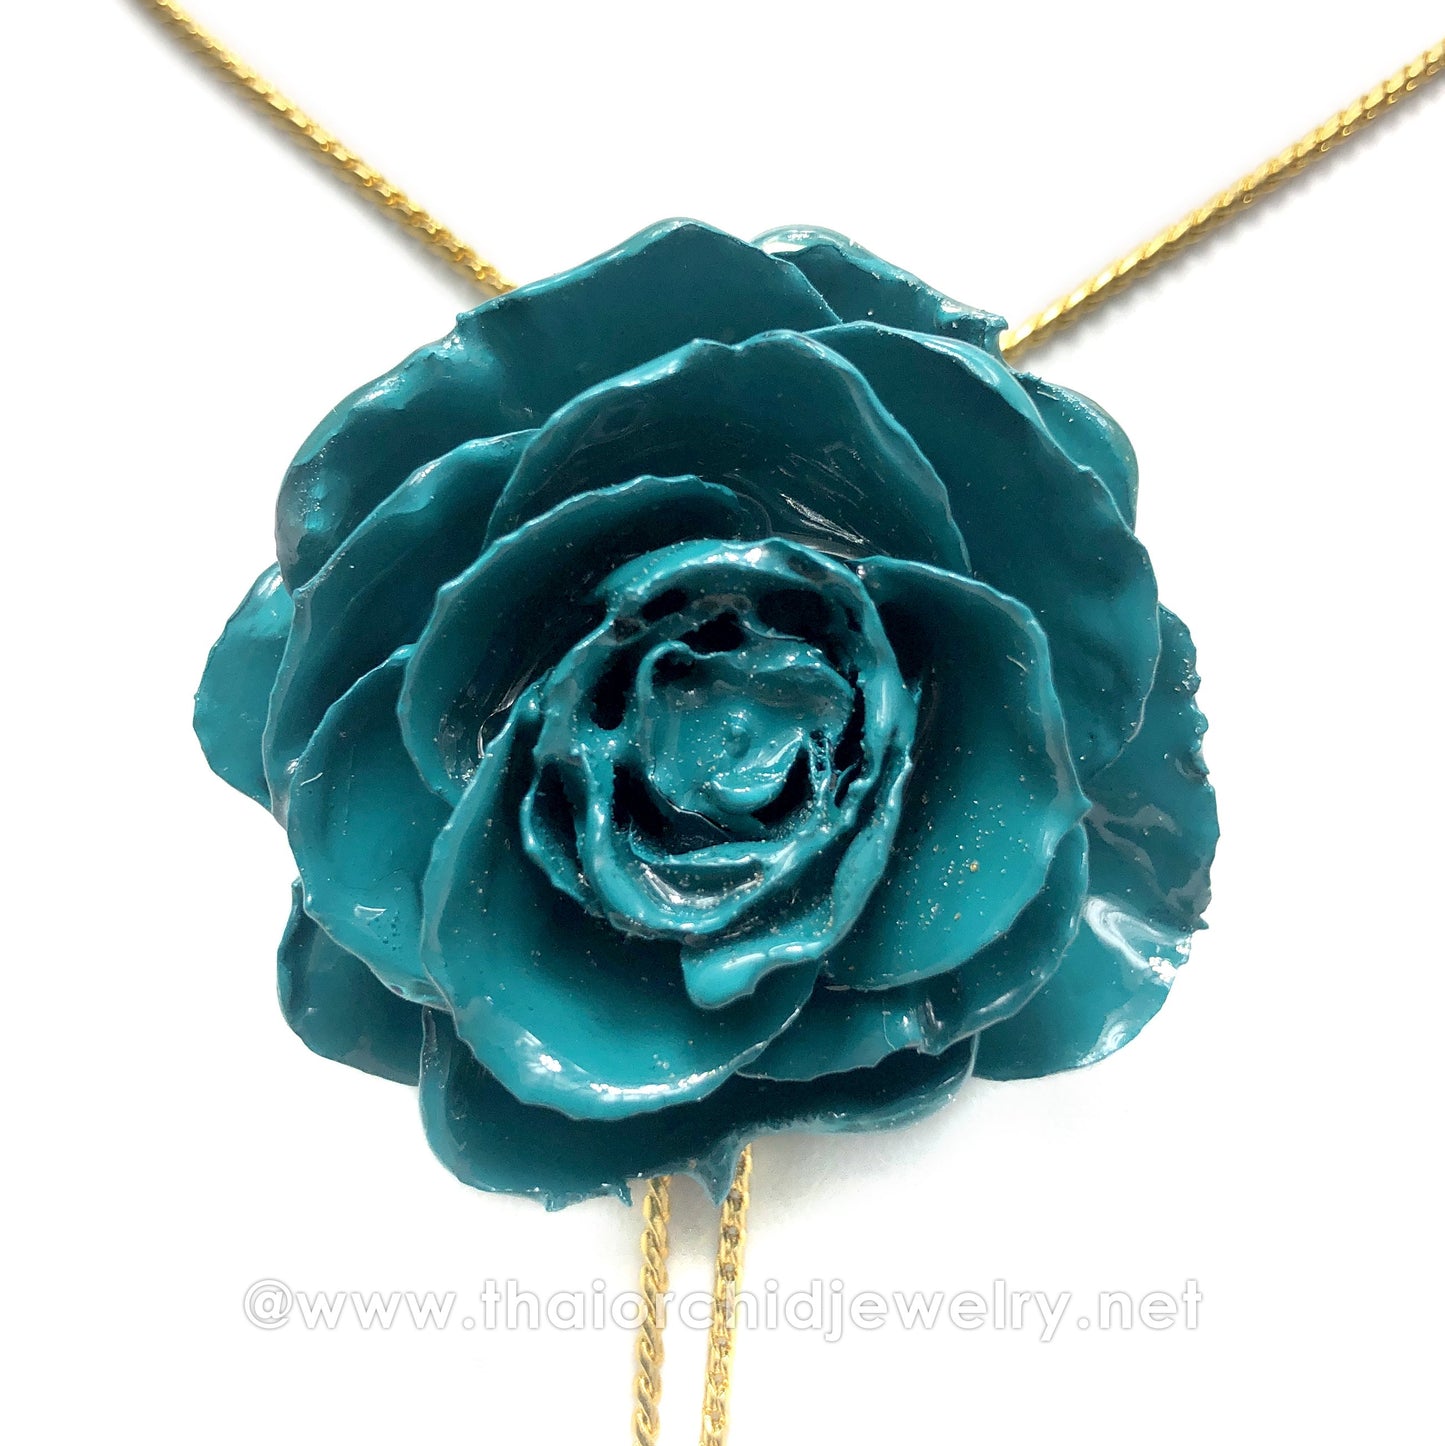 Mini Rose Mini 1.5-2.25 inch Pendant Necklace 18 inch Gold Plated 24K (Turquoise)